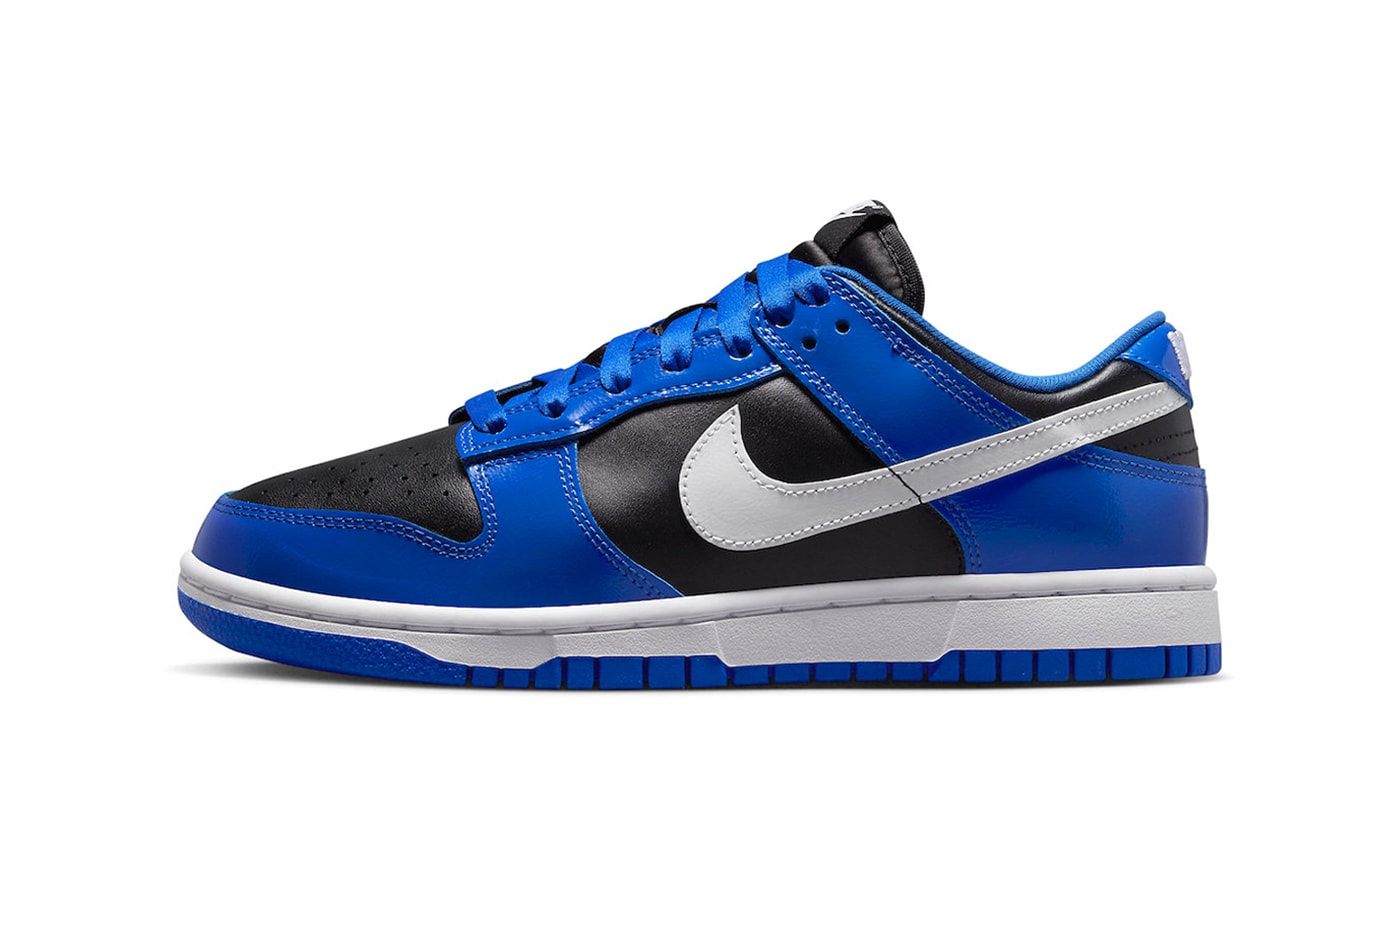 Nike Dunk Low Game Royal wmns DQ7576-400 Official Photos white black